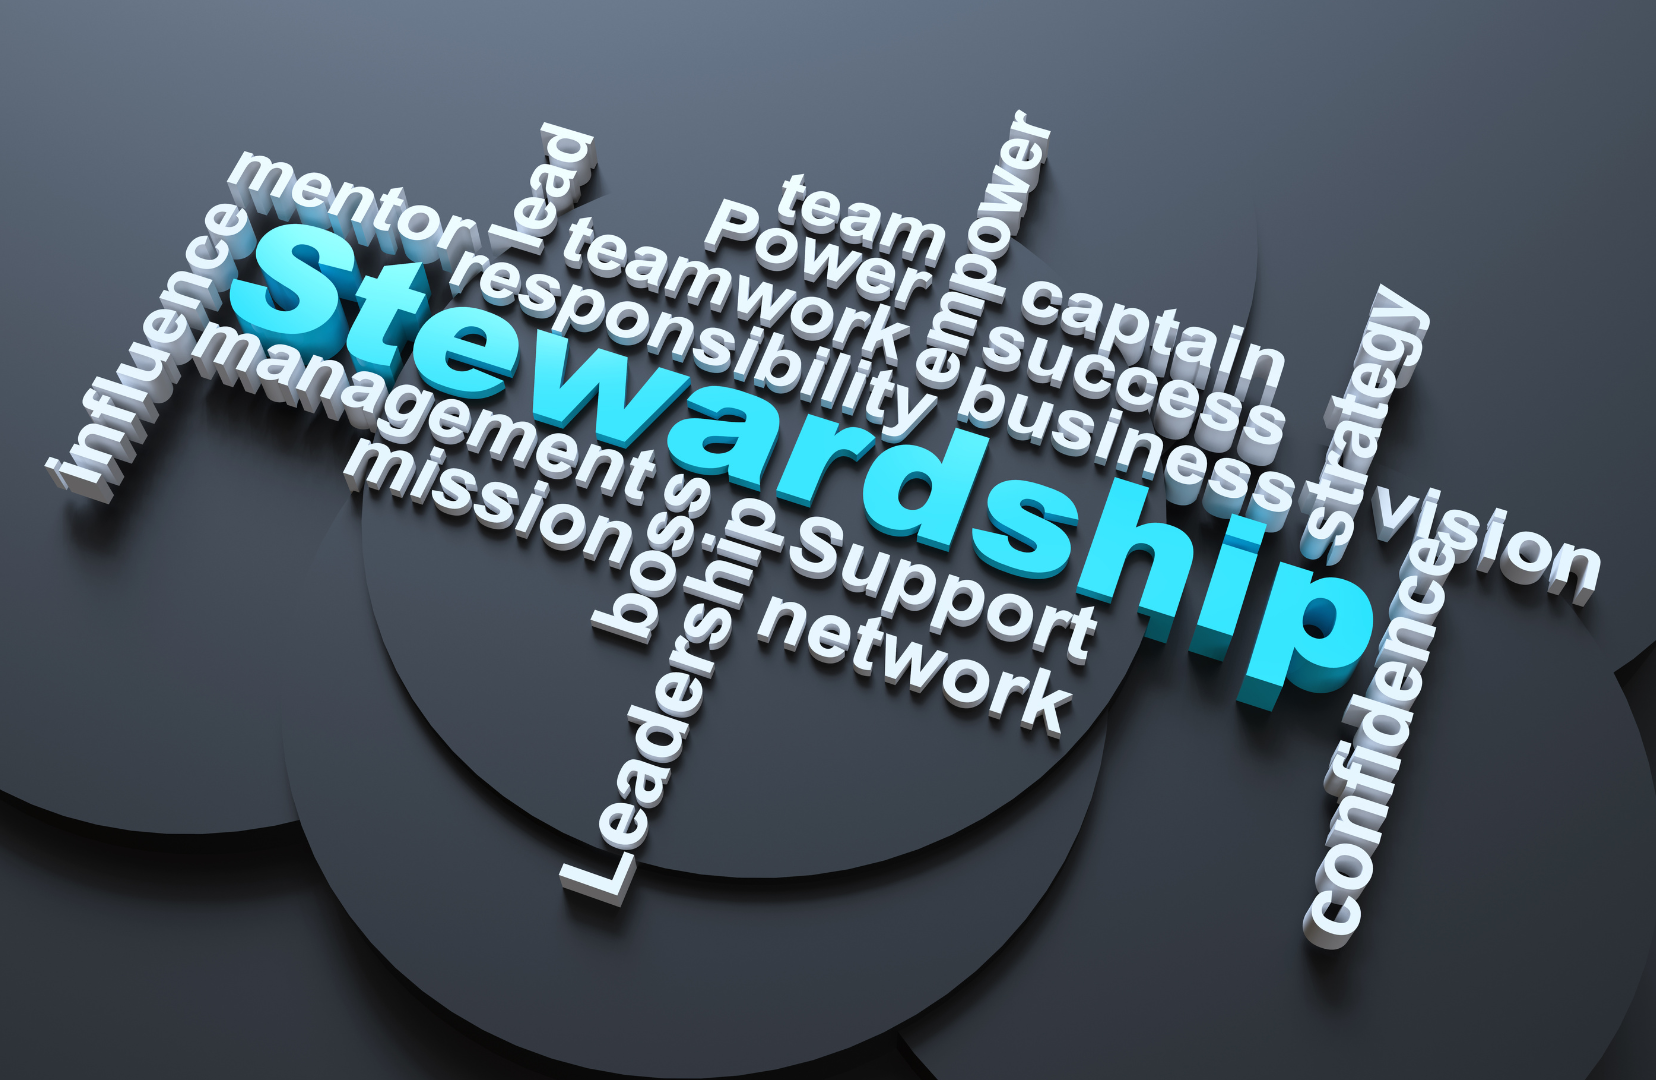 A vector graphic of the word stewardship and other leadership related vocabulary